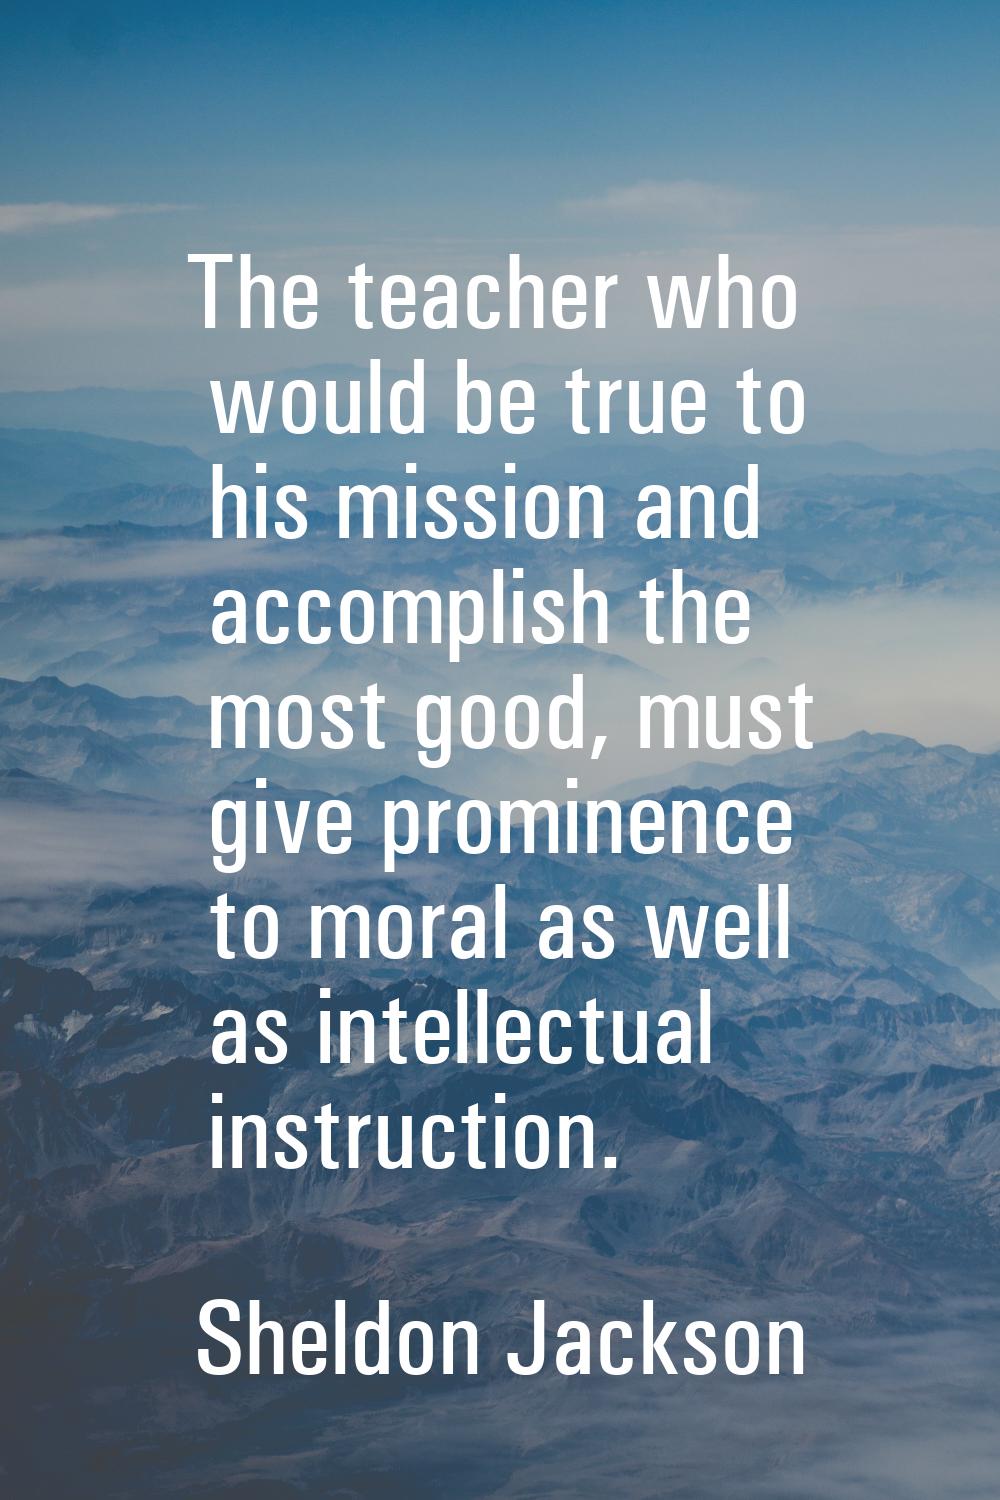 The teacher who would be true to his mission and accomplish the most good, must give prominence to 